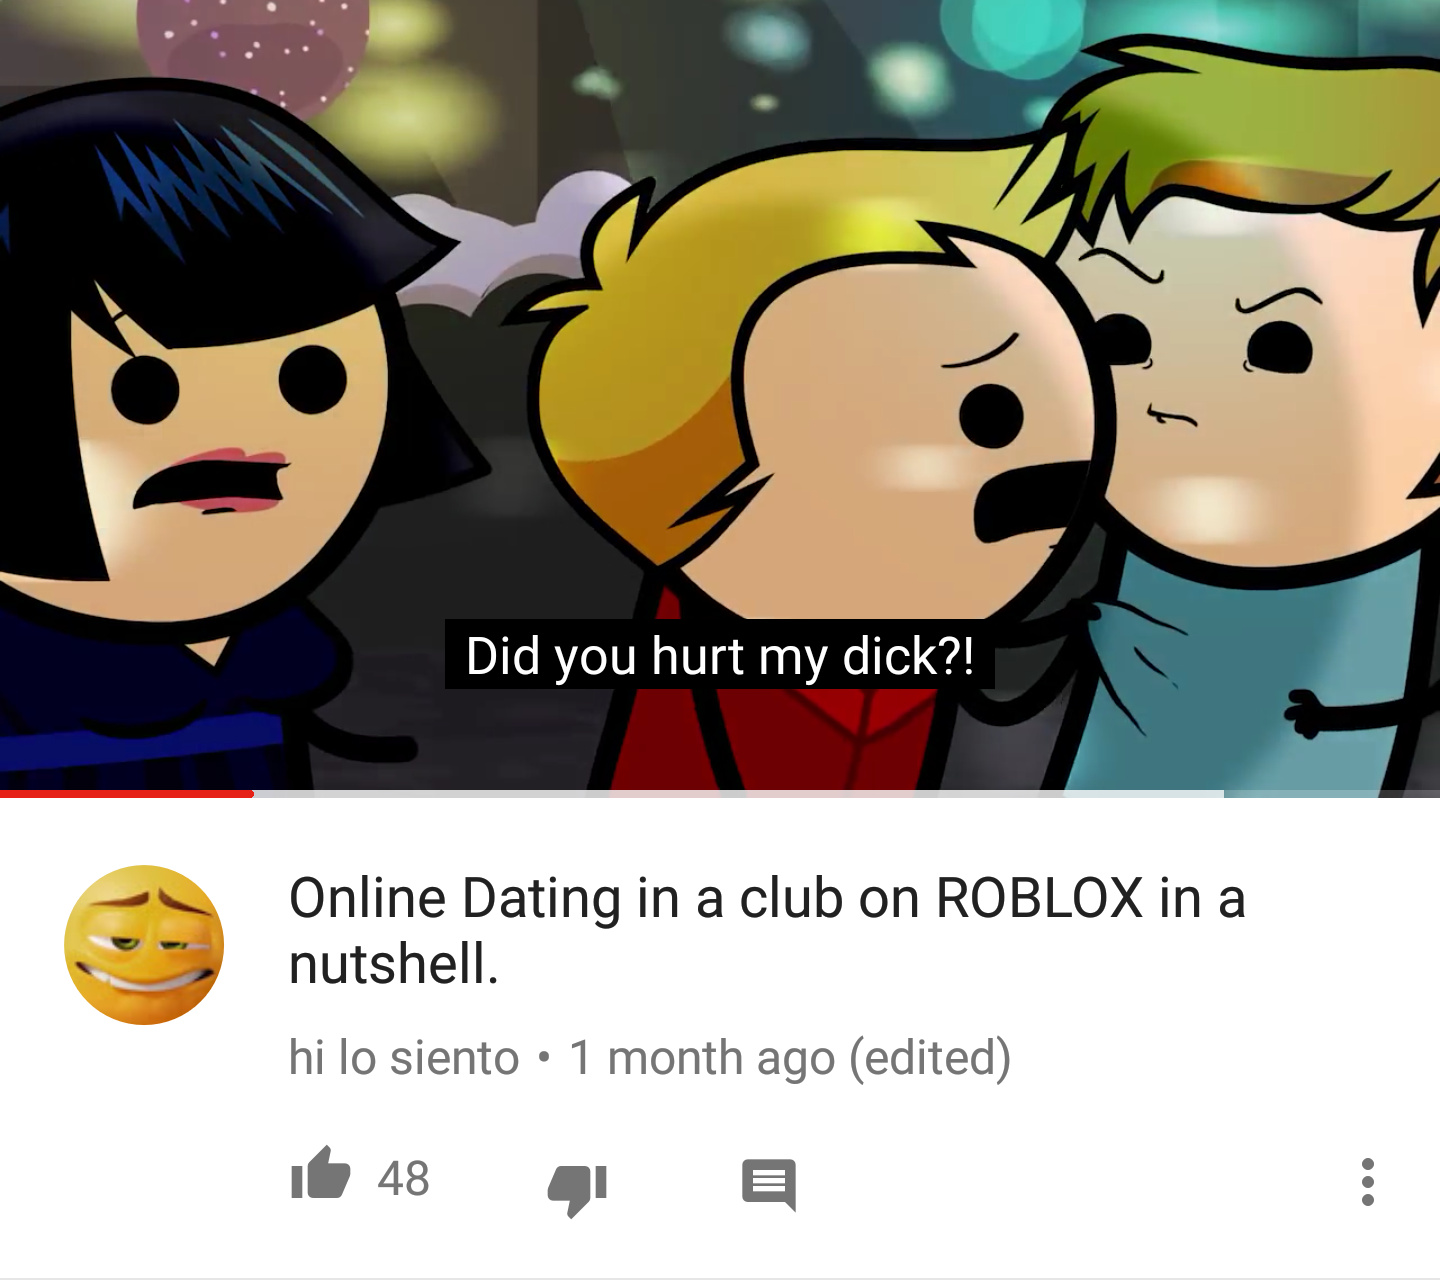 Roblox Online Dating Memes